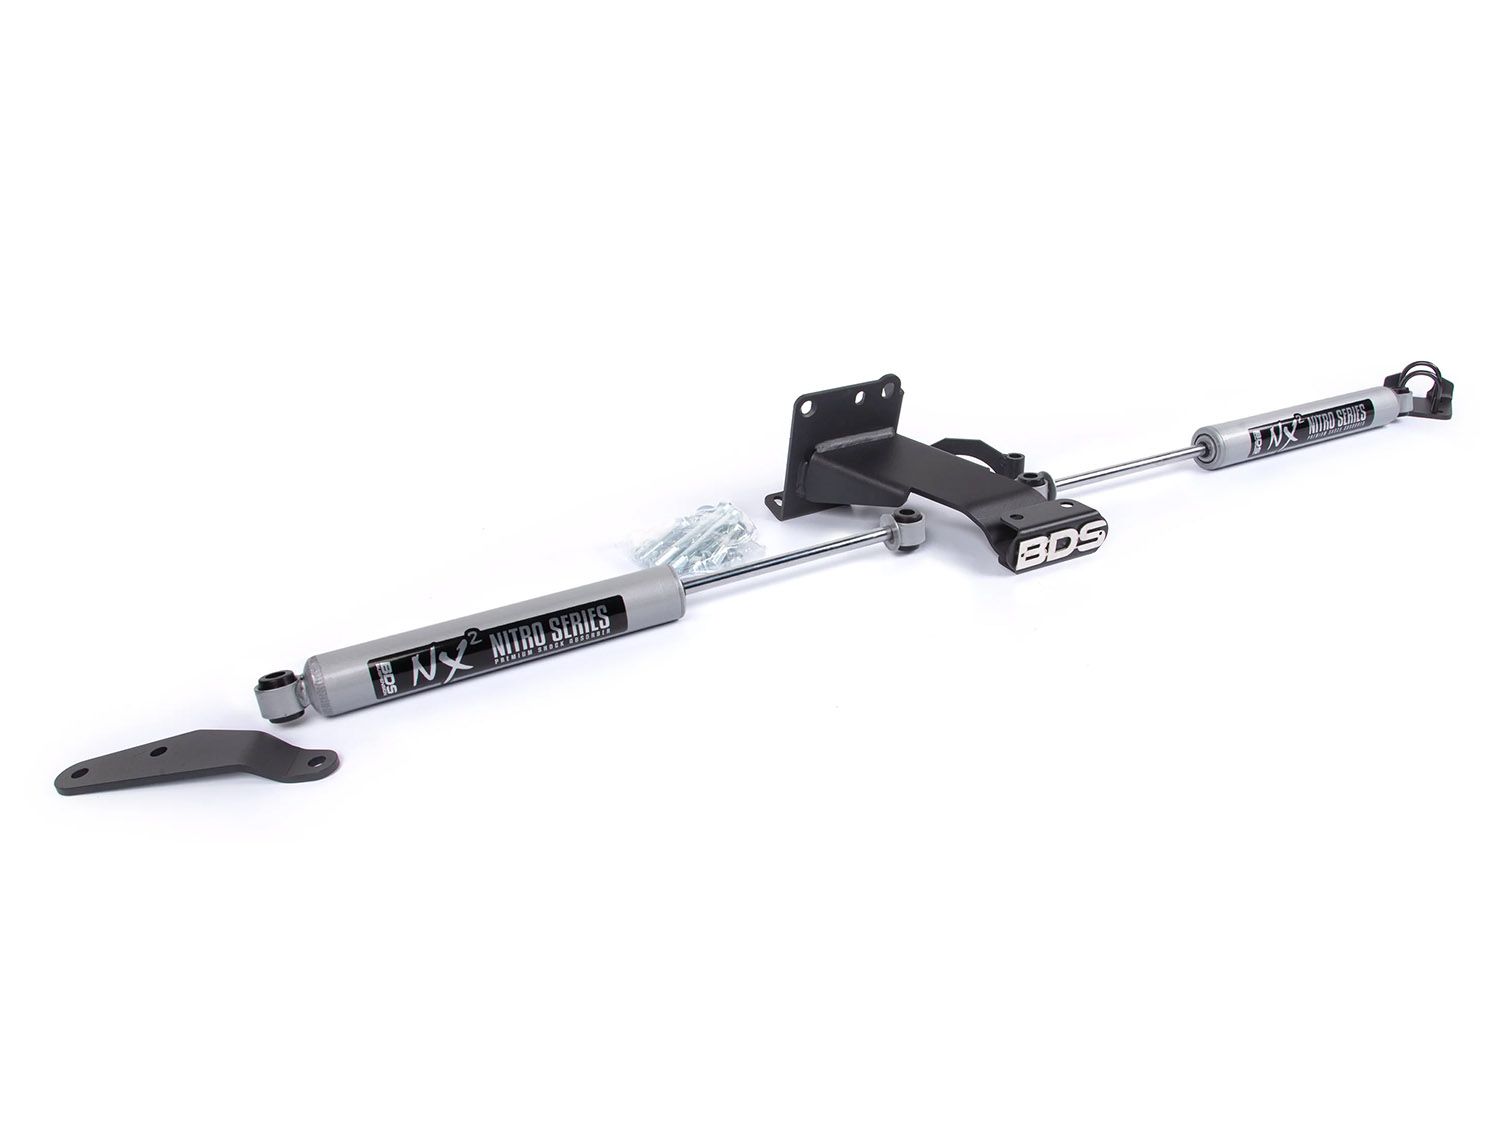 Ram 3500 2013-2018 Dodge 4WD - NX2 Dual Steering Stabilizer by BDS